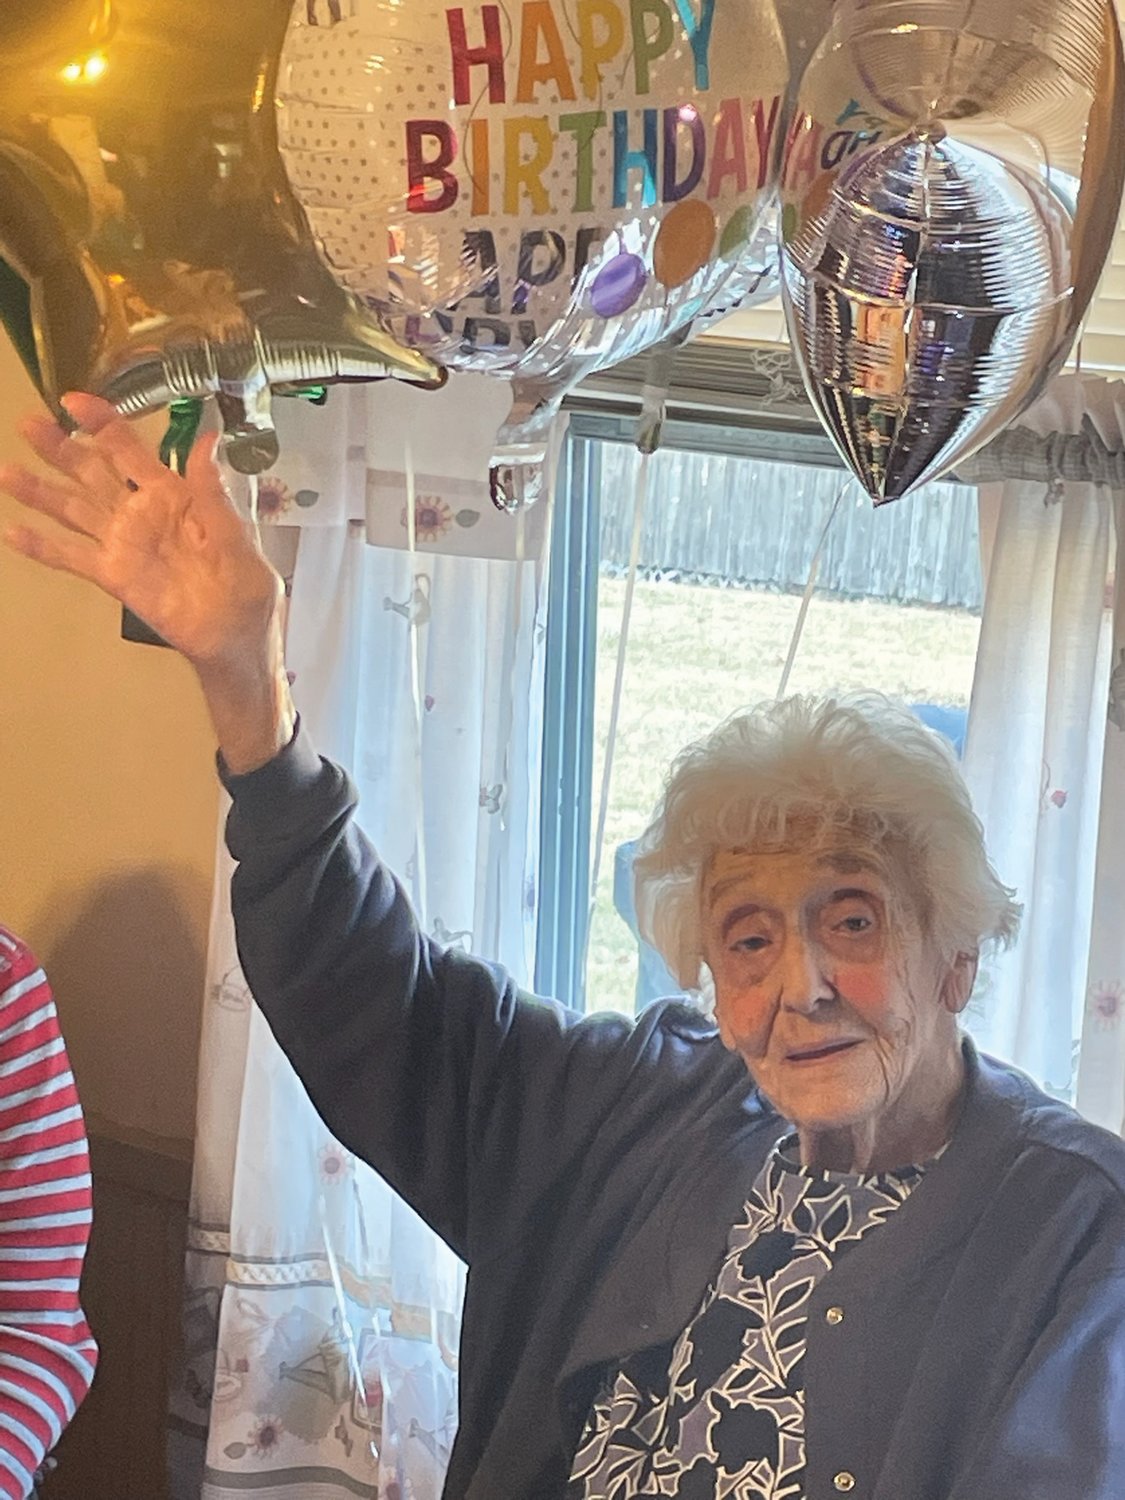 BIG PARTY: On Sunday, about 25 friends and family packed Celentano’s Binghampton Avenue home, where she’s lived her entire life, for a 100th birthday celebration.